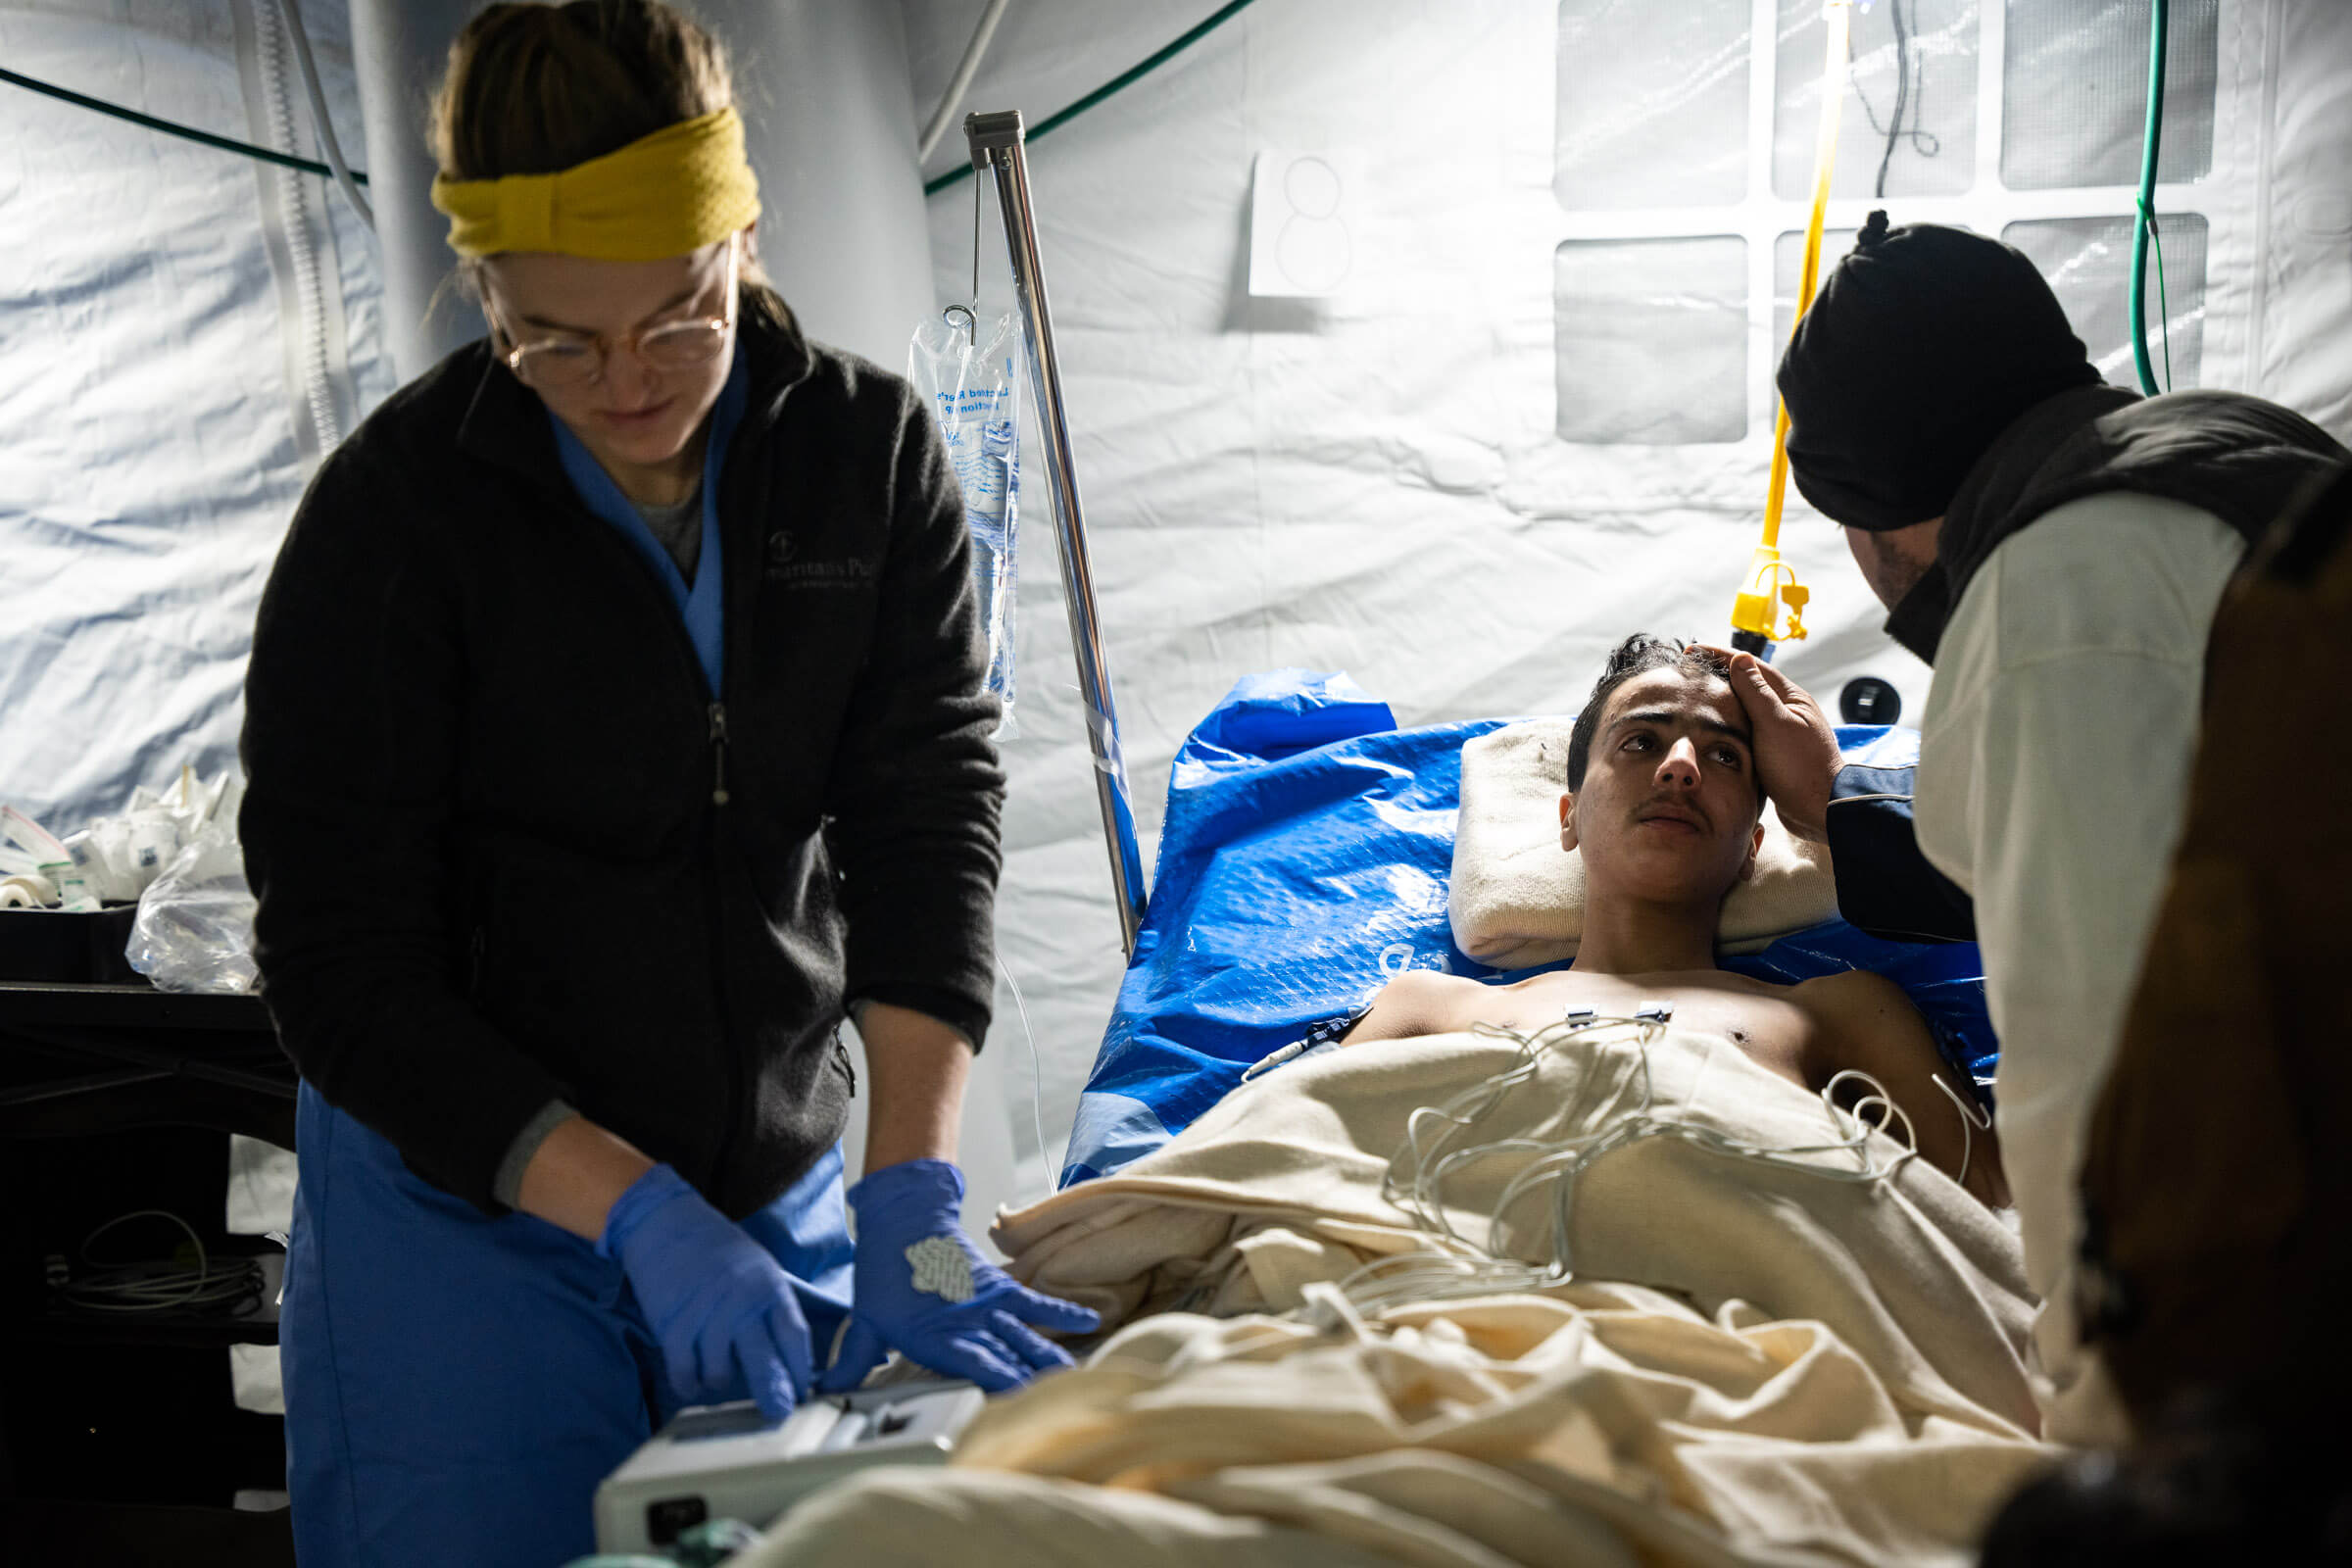 Mustafa is among the scores of earthquake survivors arriving at our hospital for critical care.